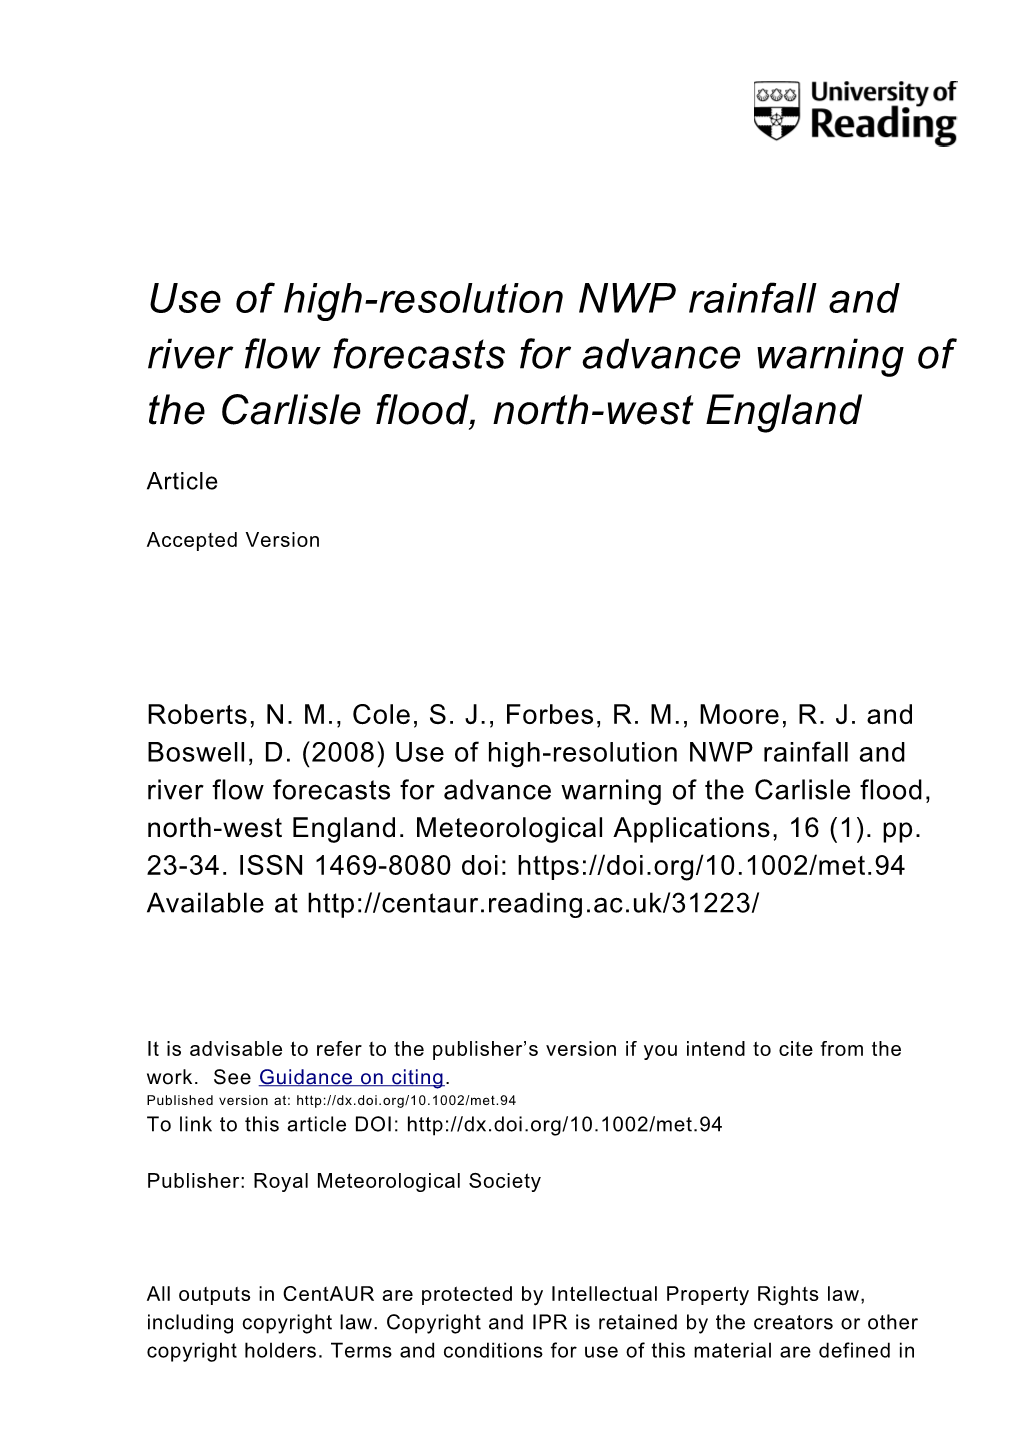 Use of High-Resolution NWP Rainfall and River Flow Forecasts for Advance Warning of the Carlisle Flood, North-West England